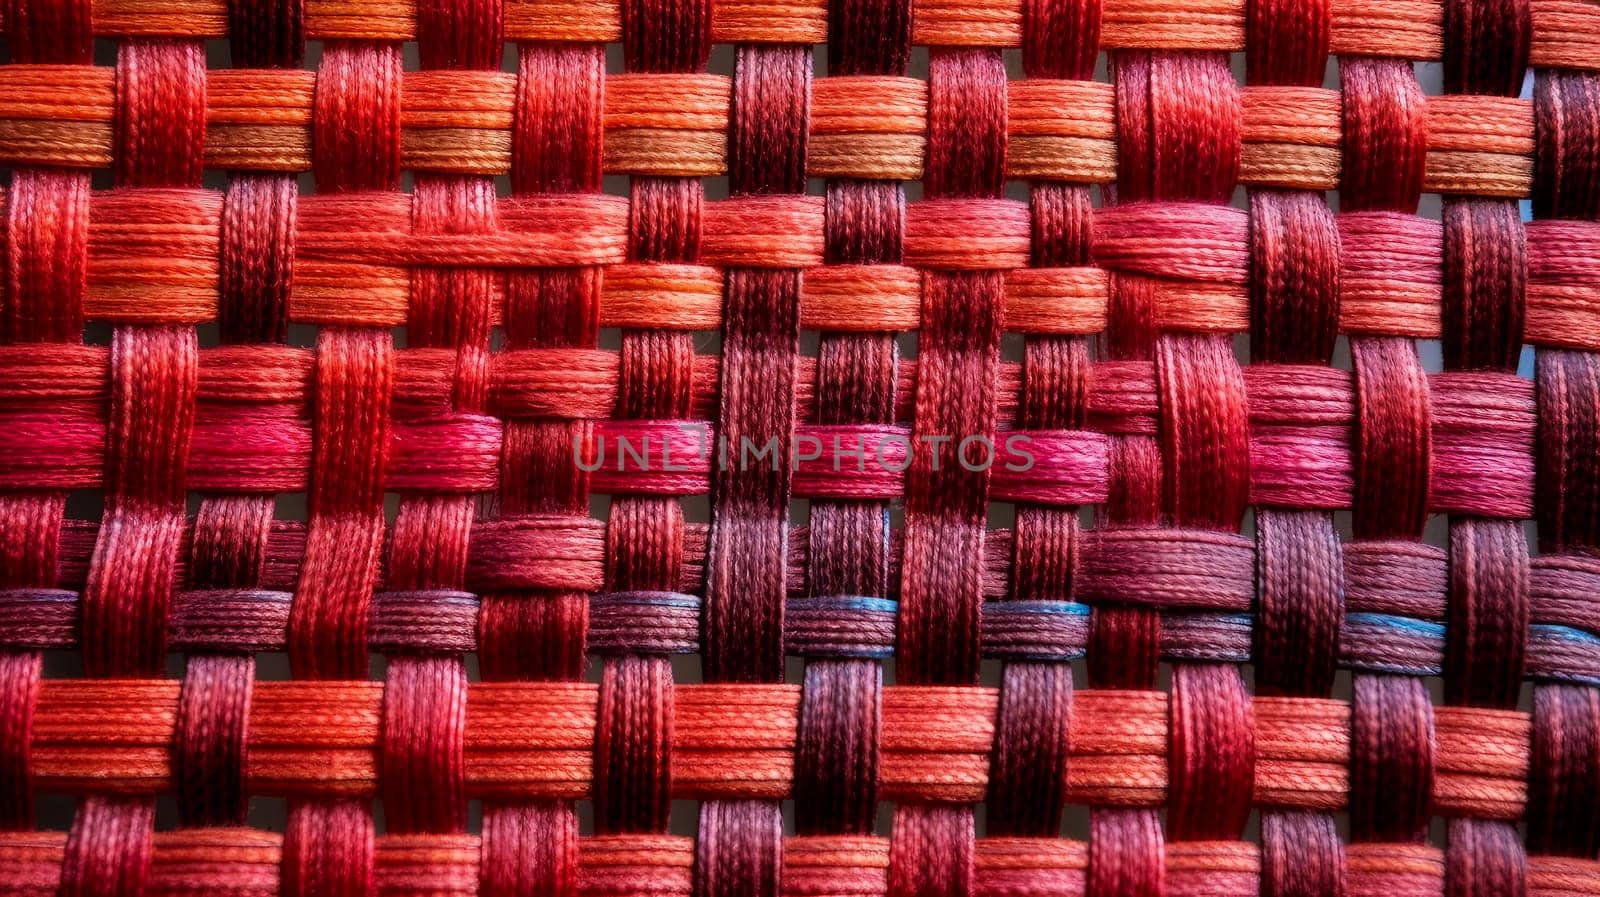 Beautiful background of red pink fabric close-up background texture linen twine braid cotton linen woven canvas jute burlap natural fiber bag linen fabric clothing, copy space.